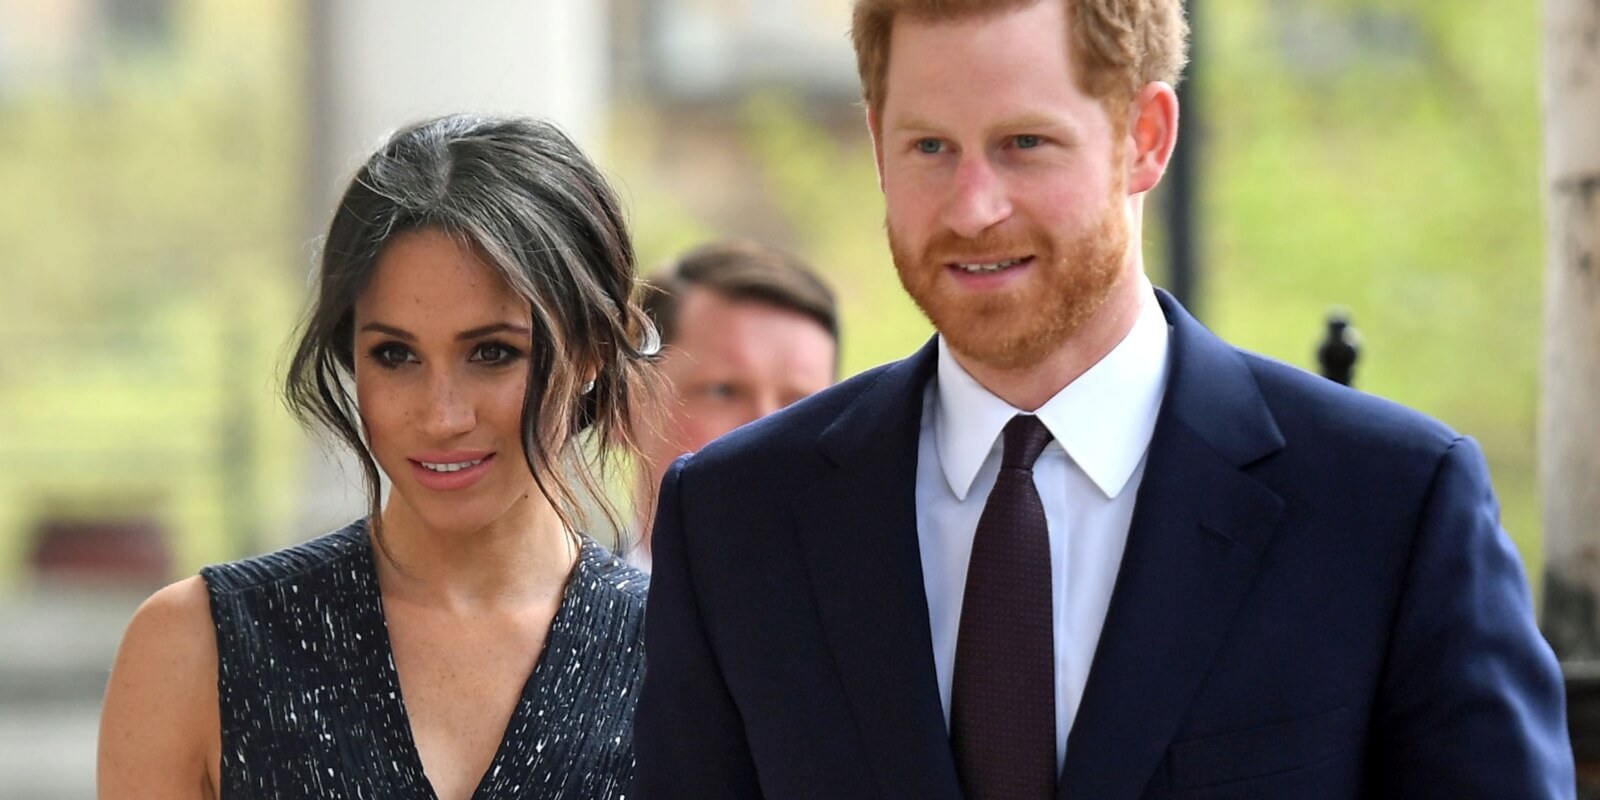 Meghan Markle and Prince Harry at a 2018 photocall.